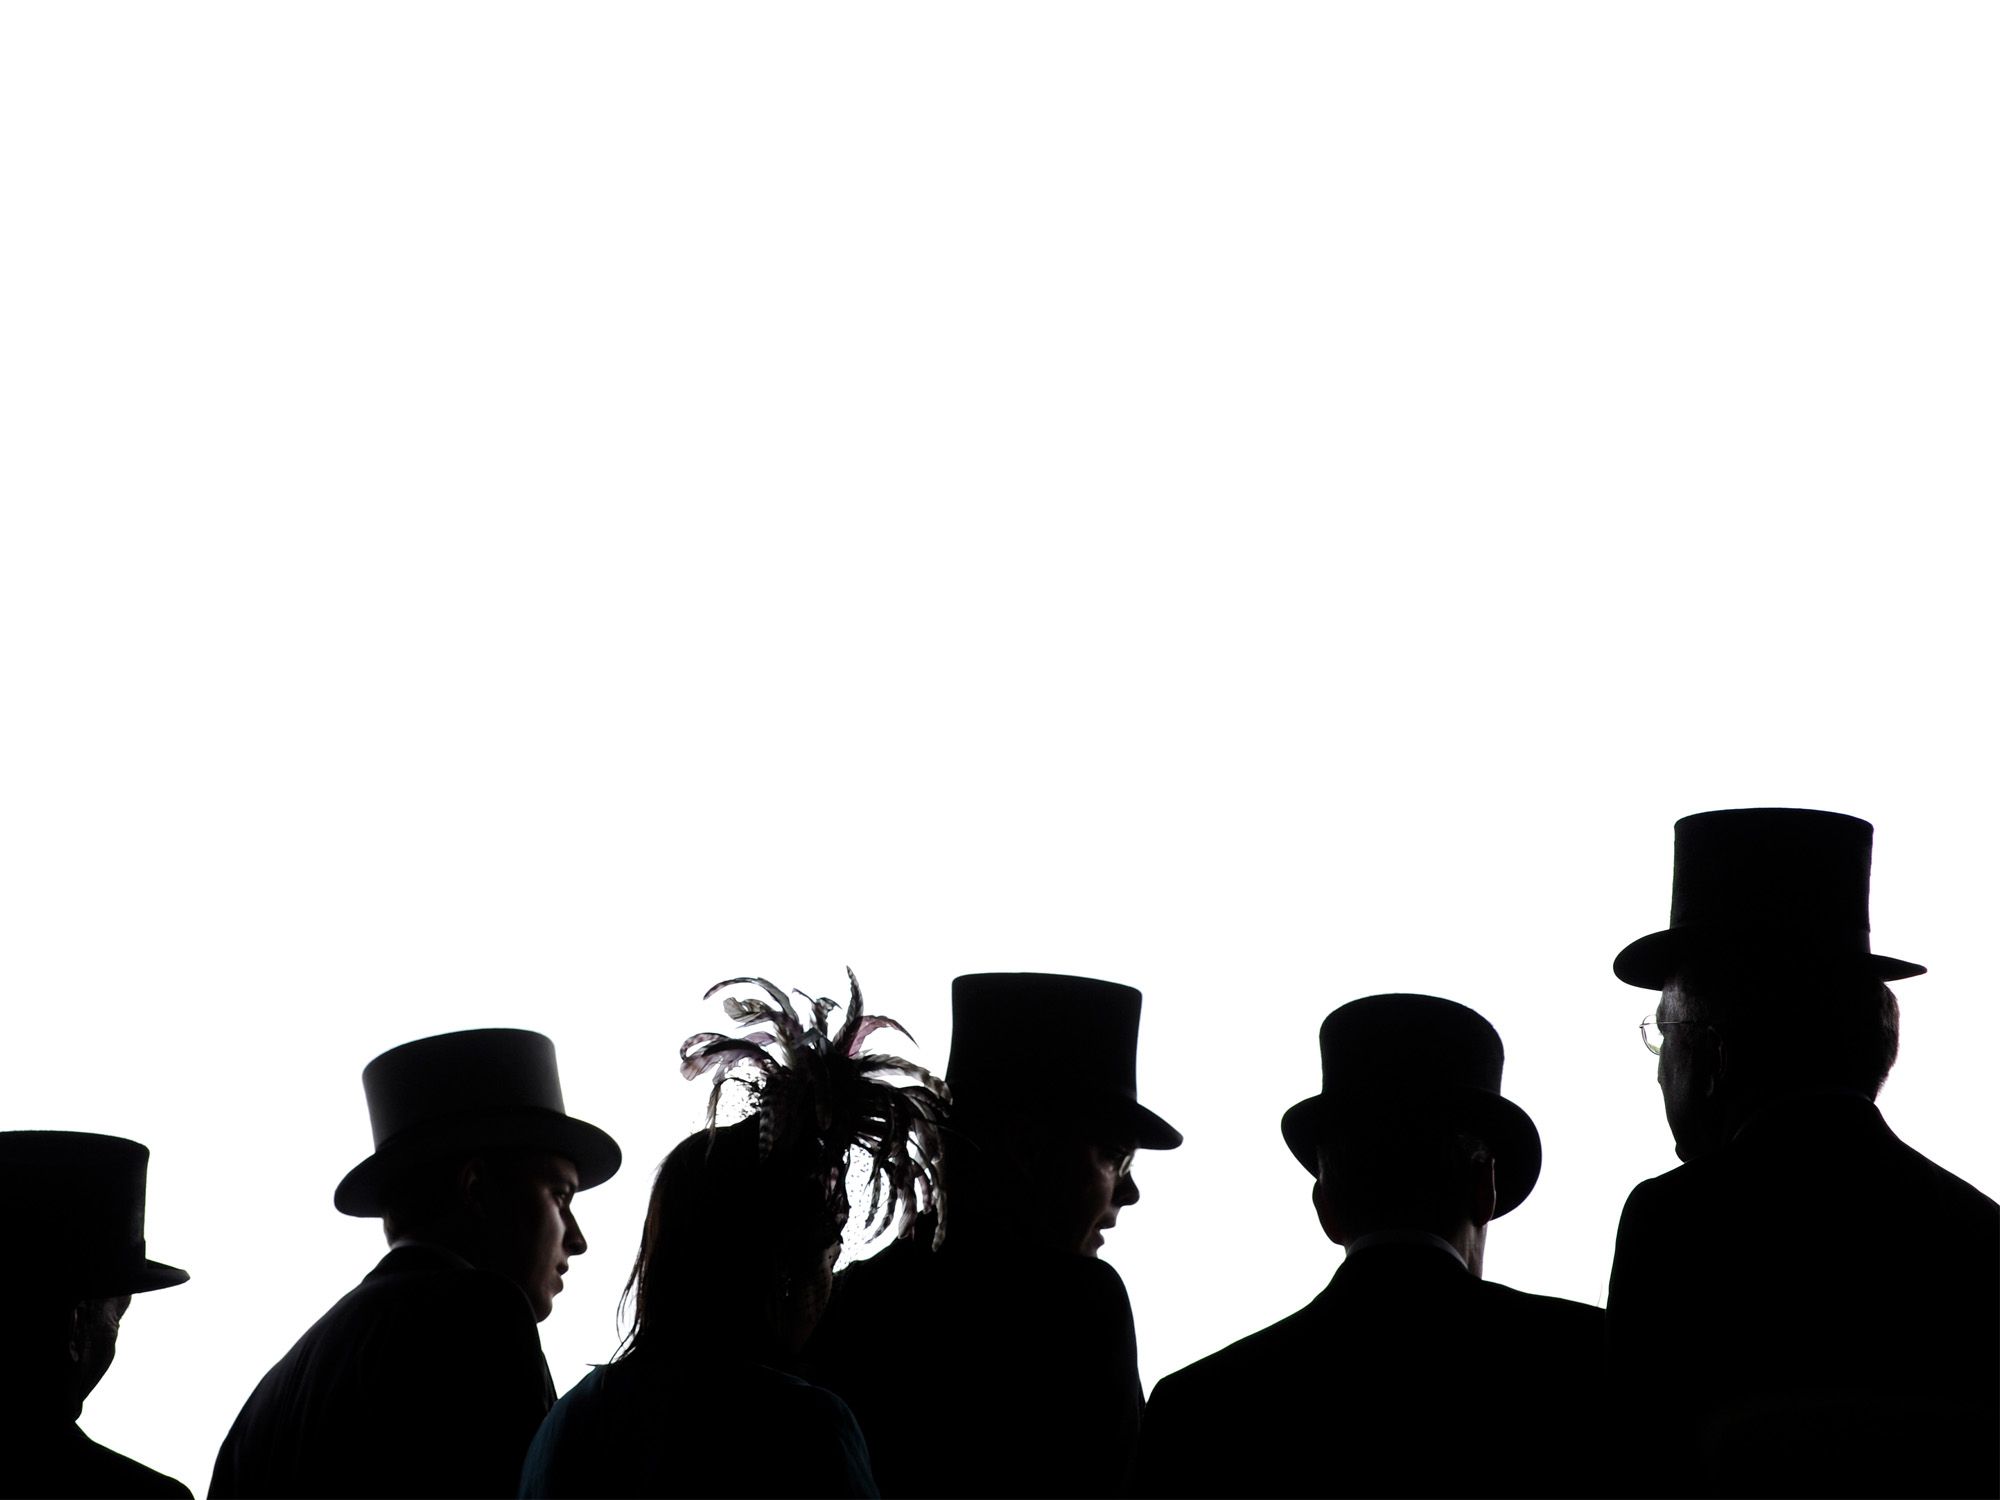 racegoers await the start of the meeting during the first day of royal ascot in berkshire west of london on june 16 2009